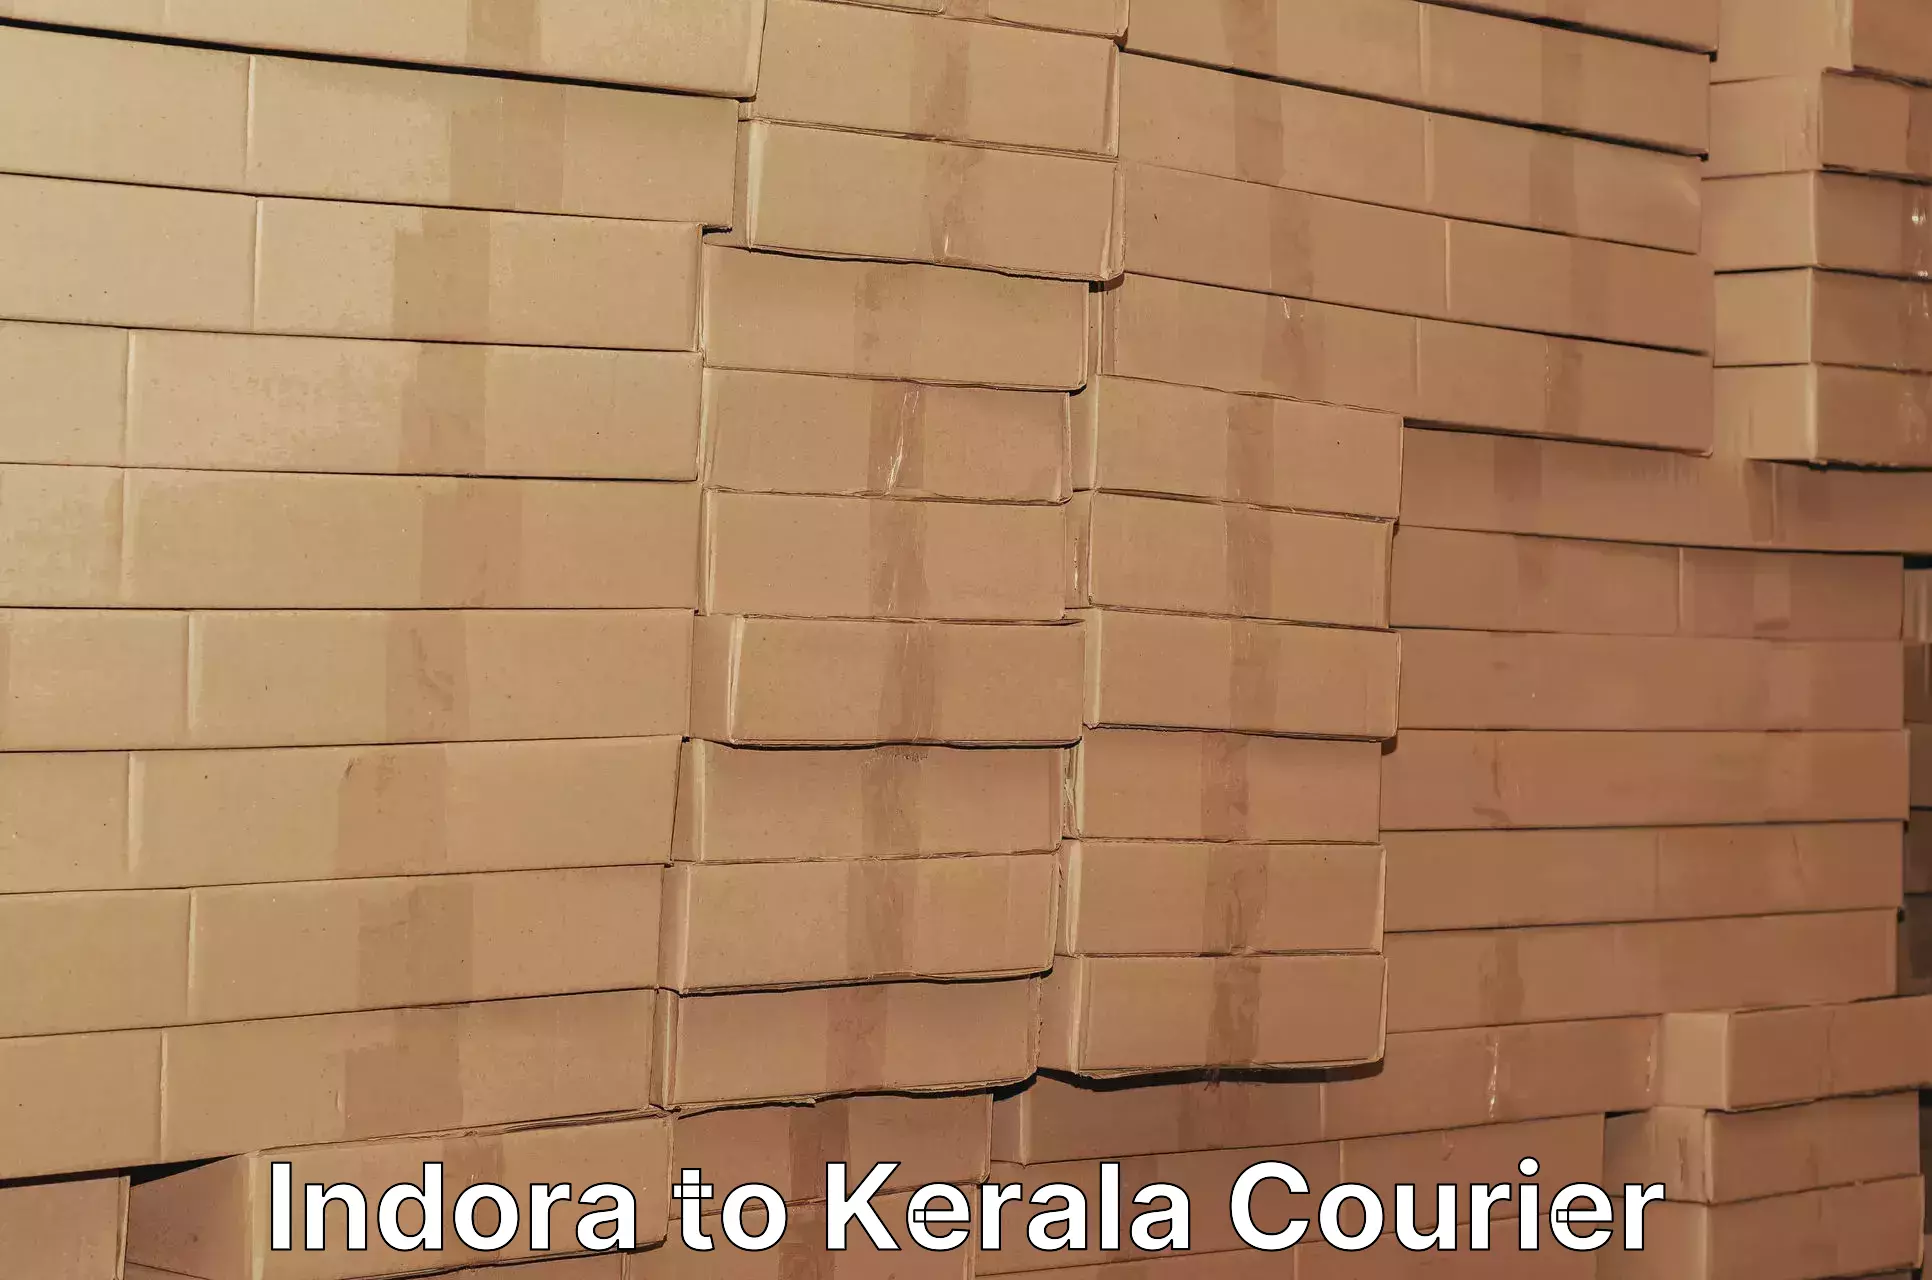 Global courier networks Indora to Kerala